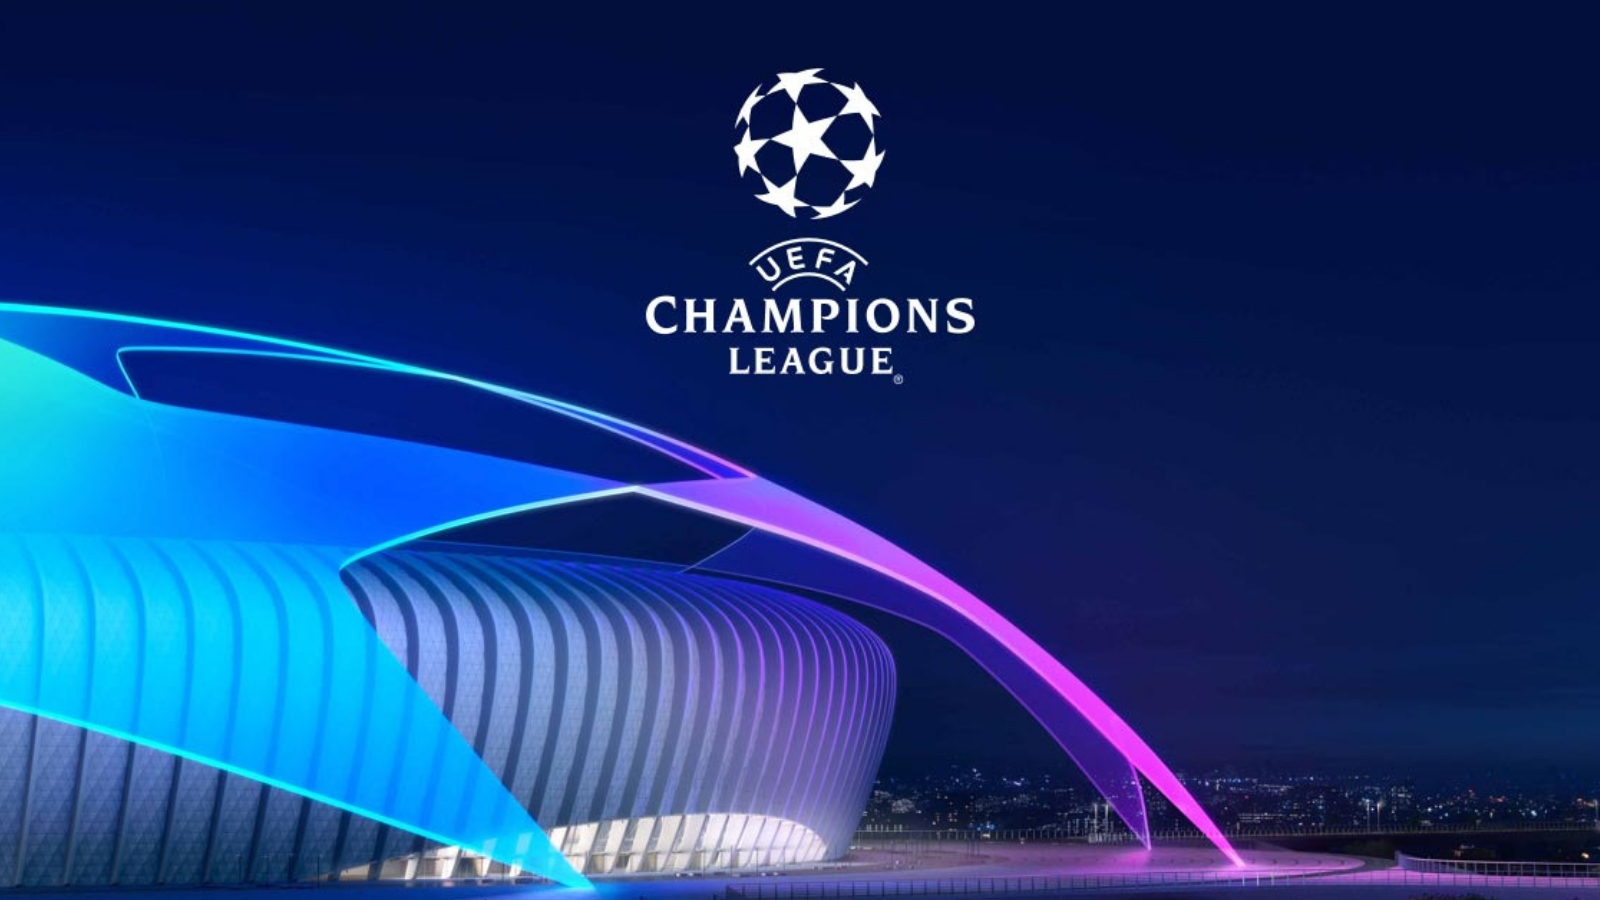 Champions League 4K Wallpapers